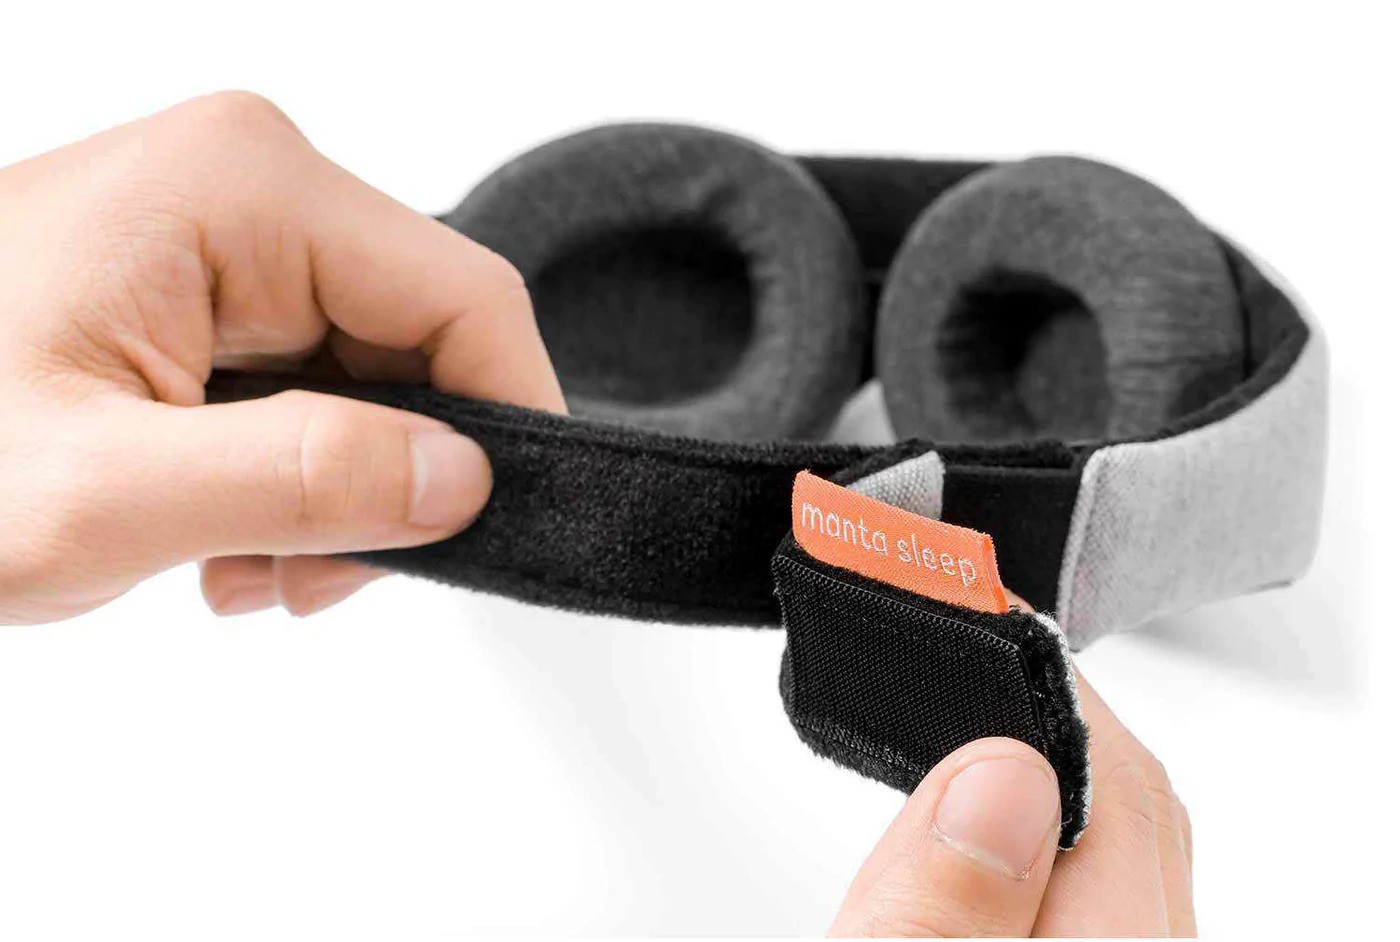 Hands holding the Velcro closure of a sleep mask with eye cups.